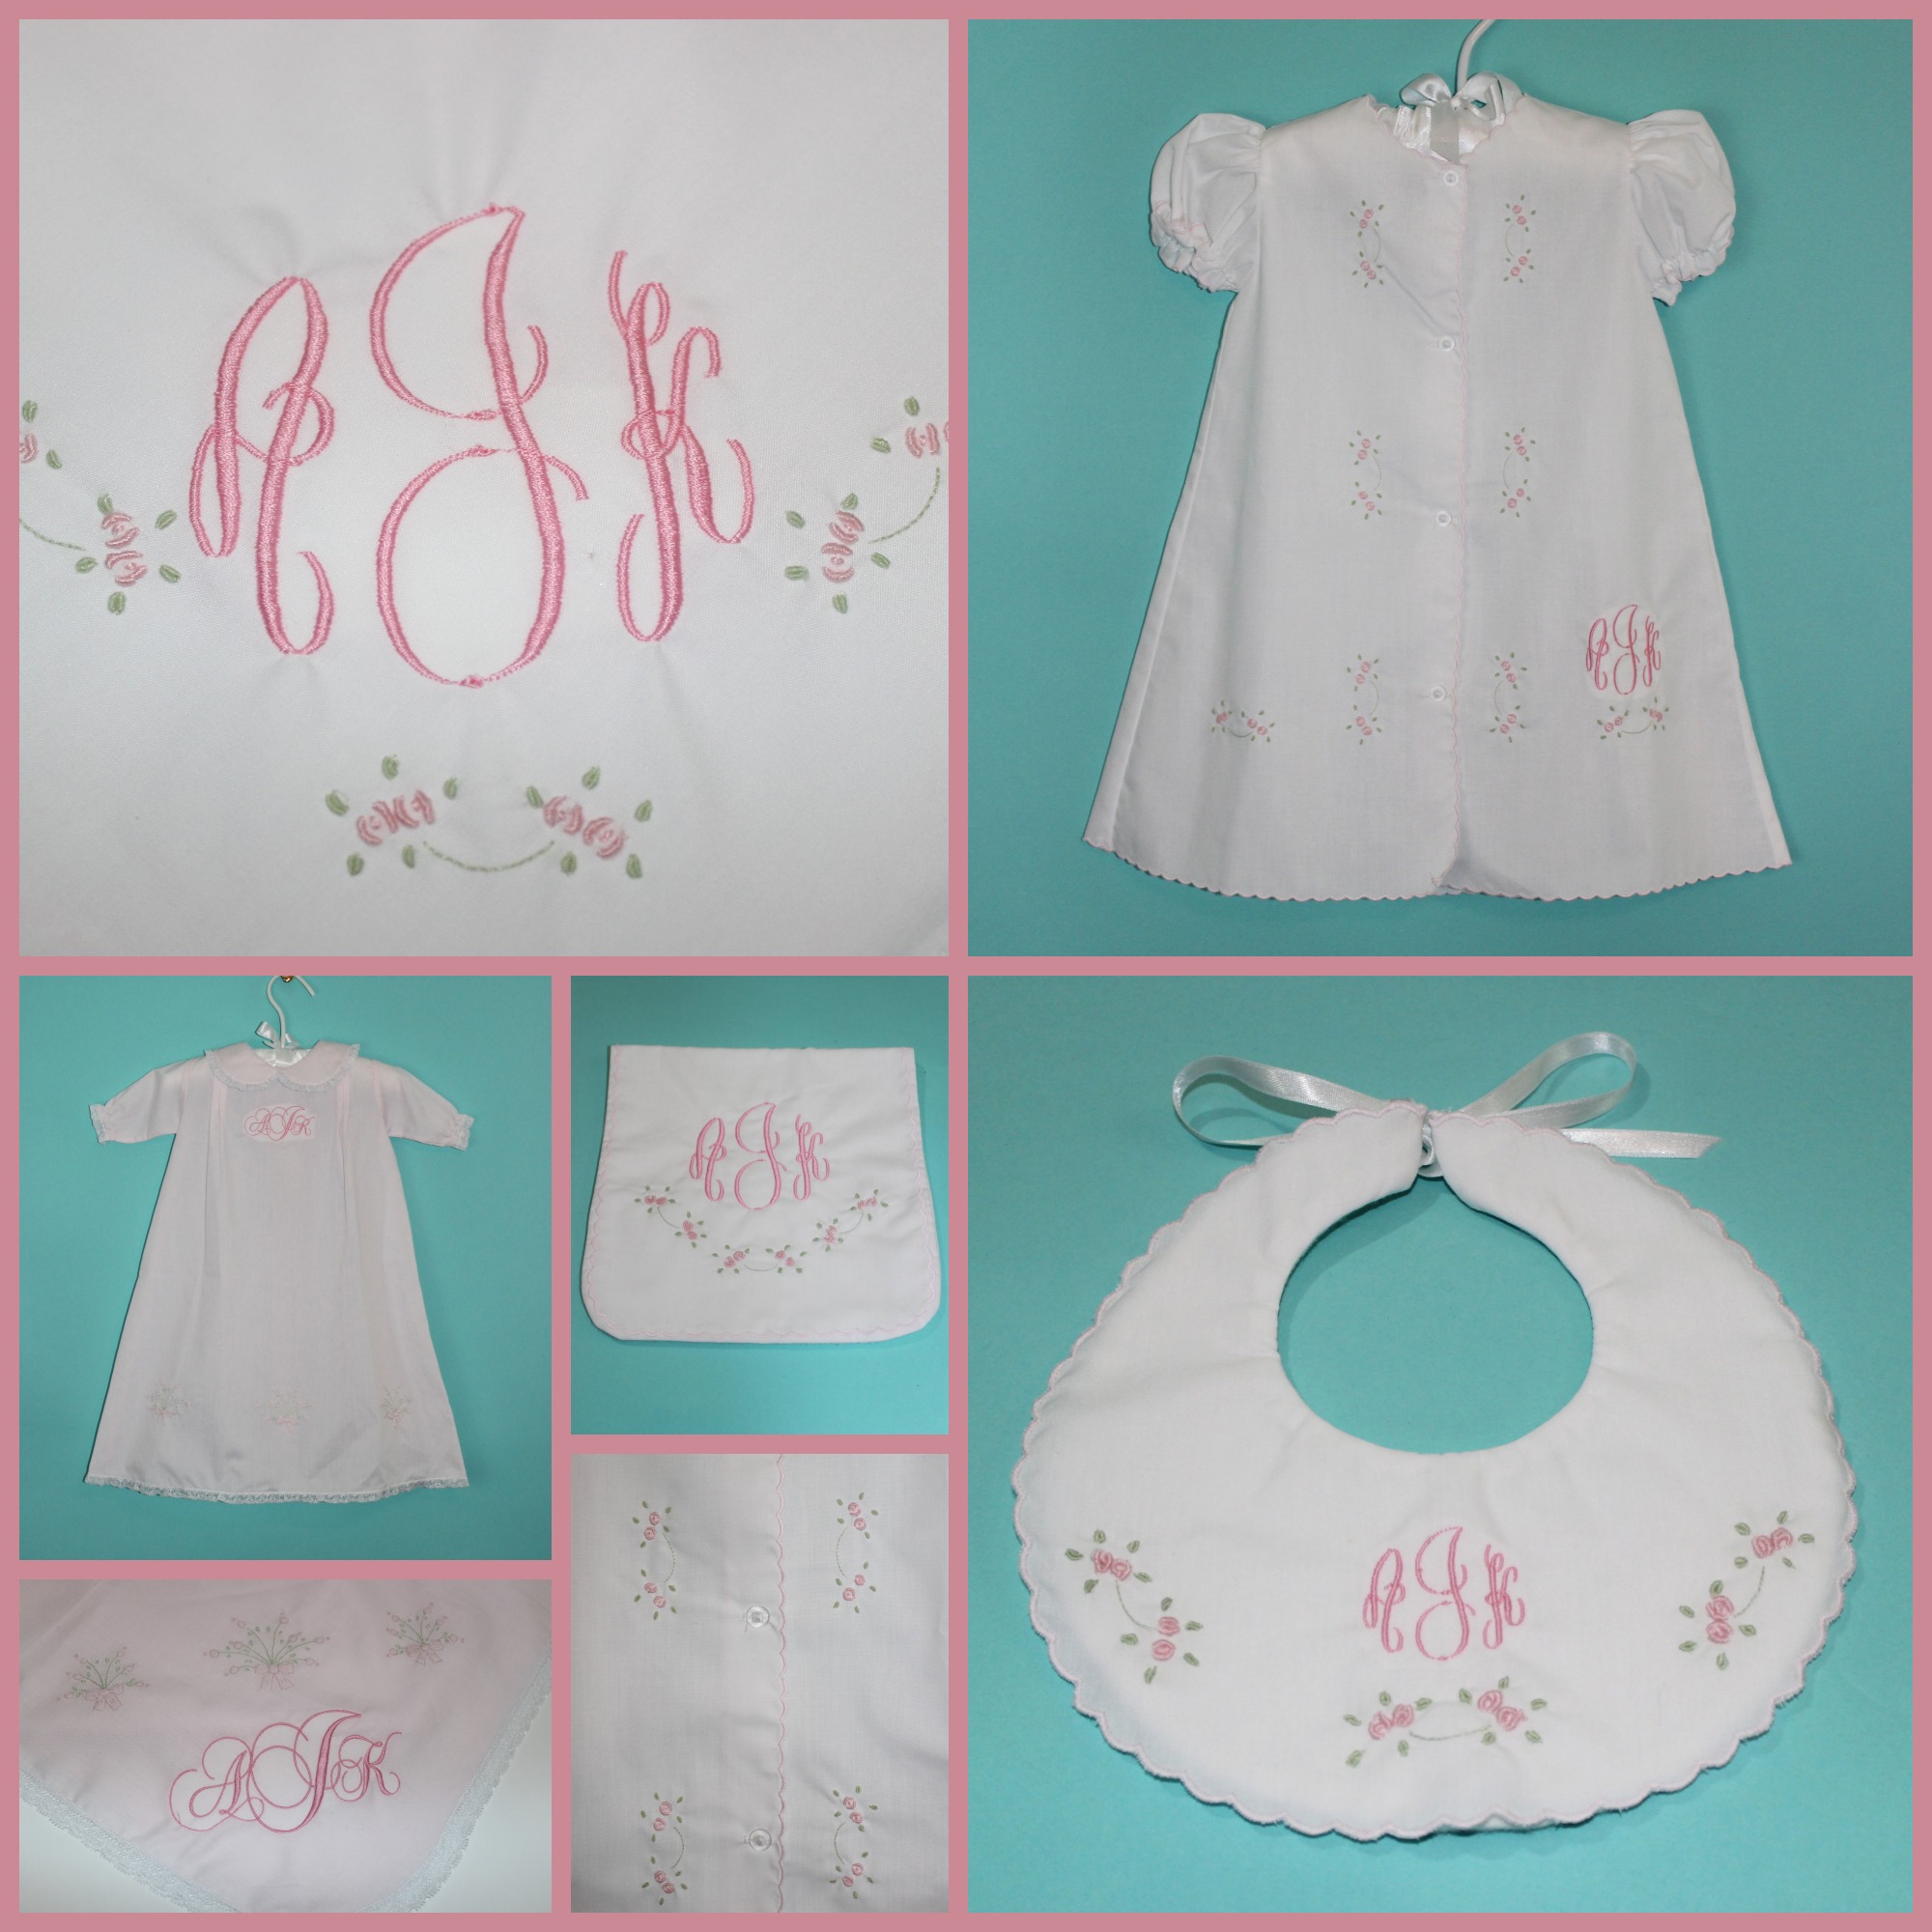 Consigned gown, blanket, bib set with the monogram AKJ available at www.MatchMyMonogram.